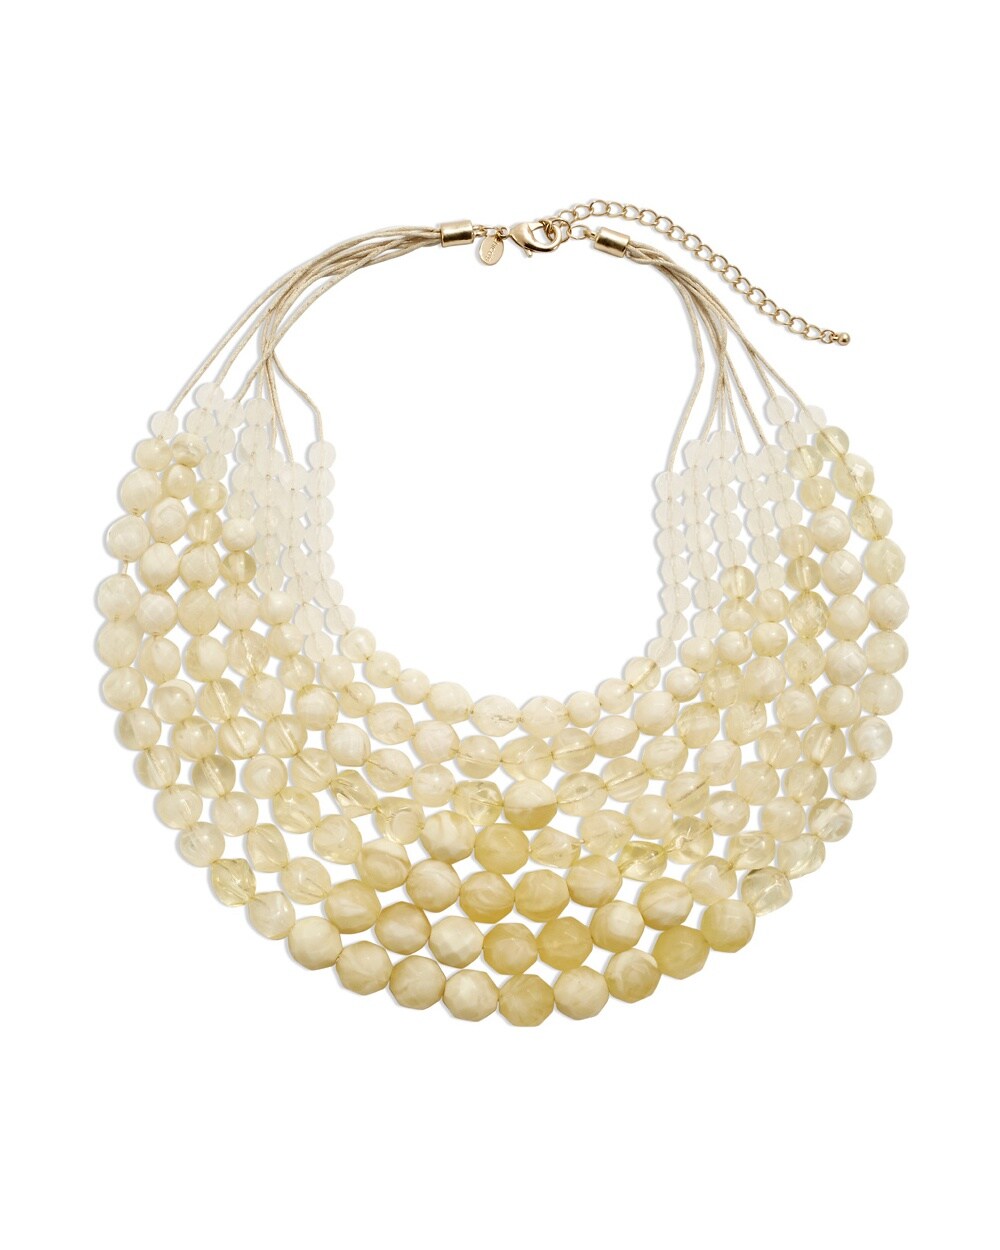 Pria Layered Bead Necklace